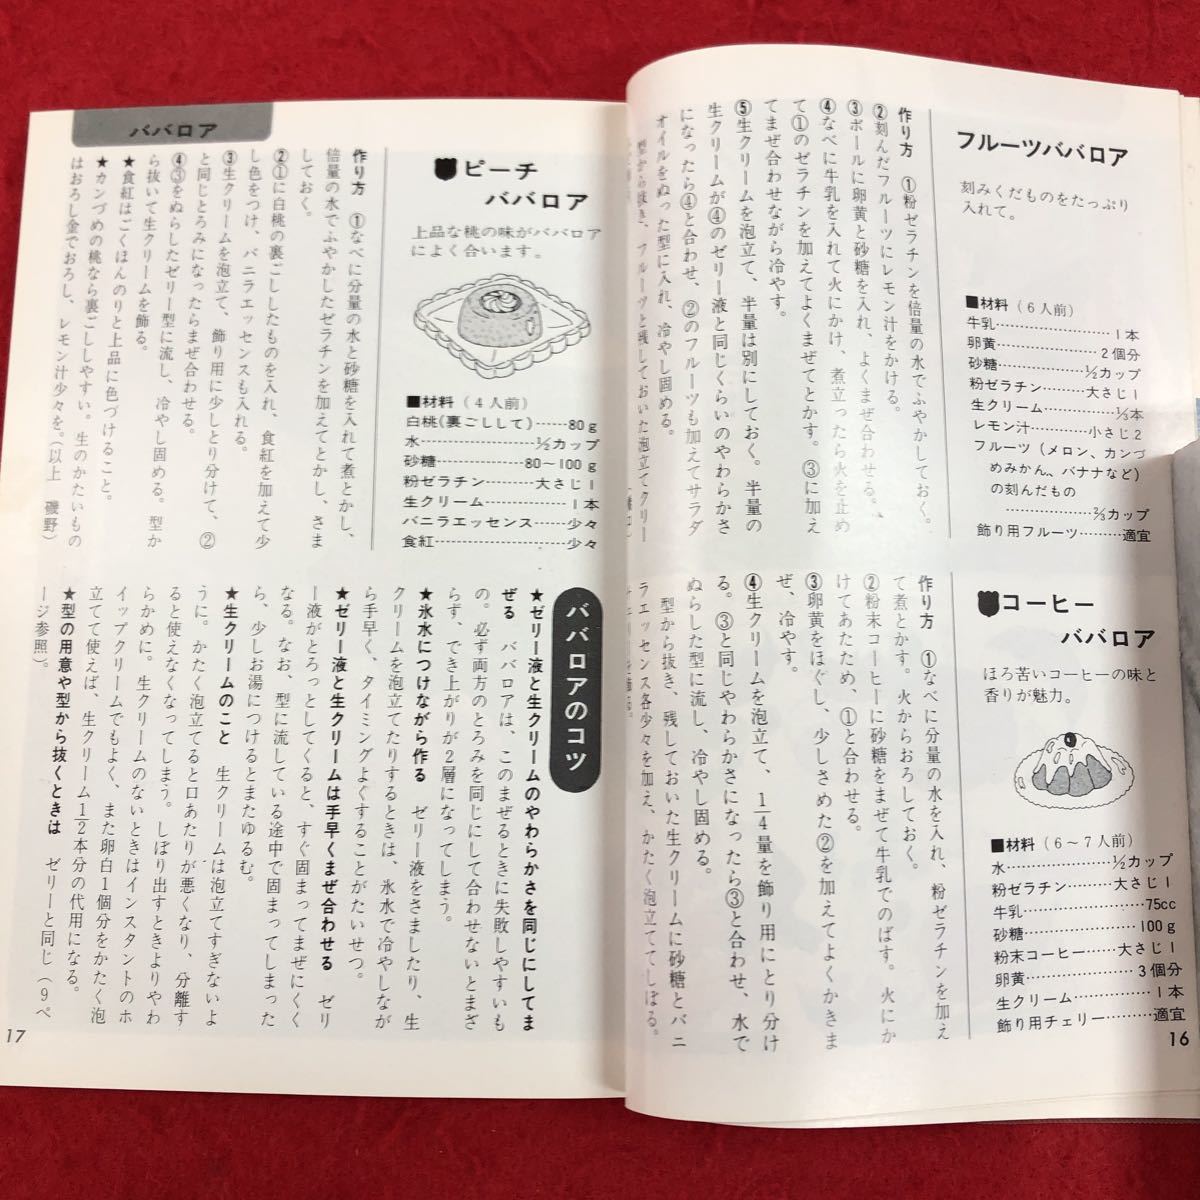 c-078 happy confection ... . library cooking series Ishikawa .. work Showa era 54 year 7 month 25 day issue home cookin recipe book@ jelly cake Japanese confectionery another *6